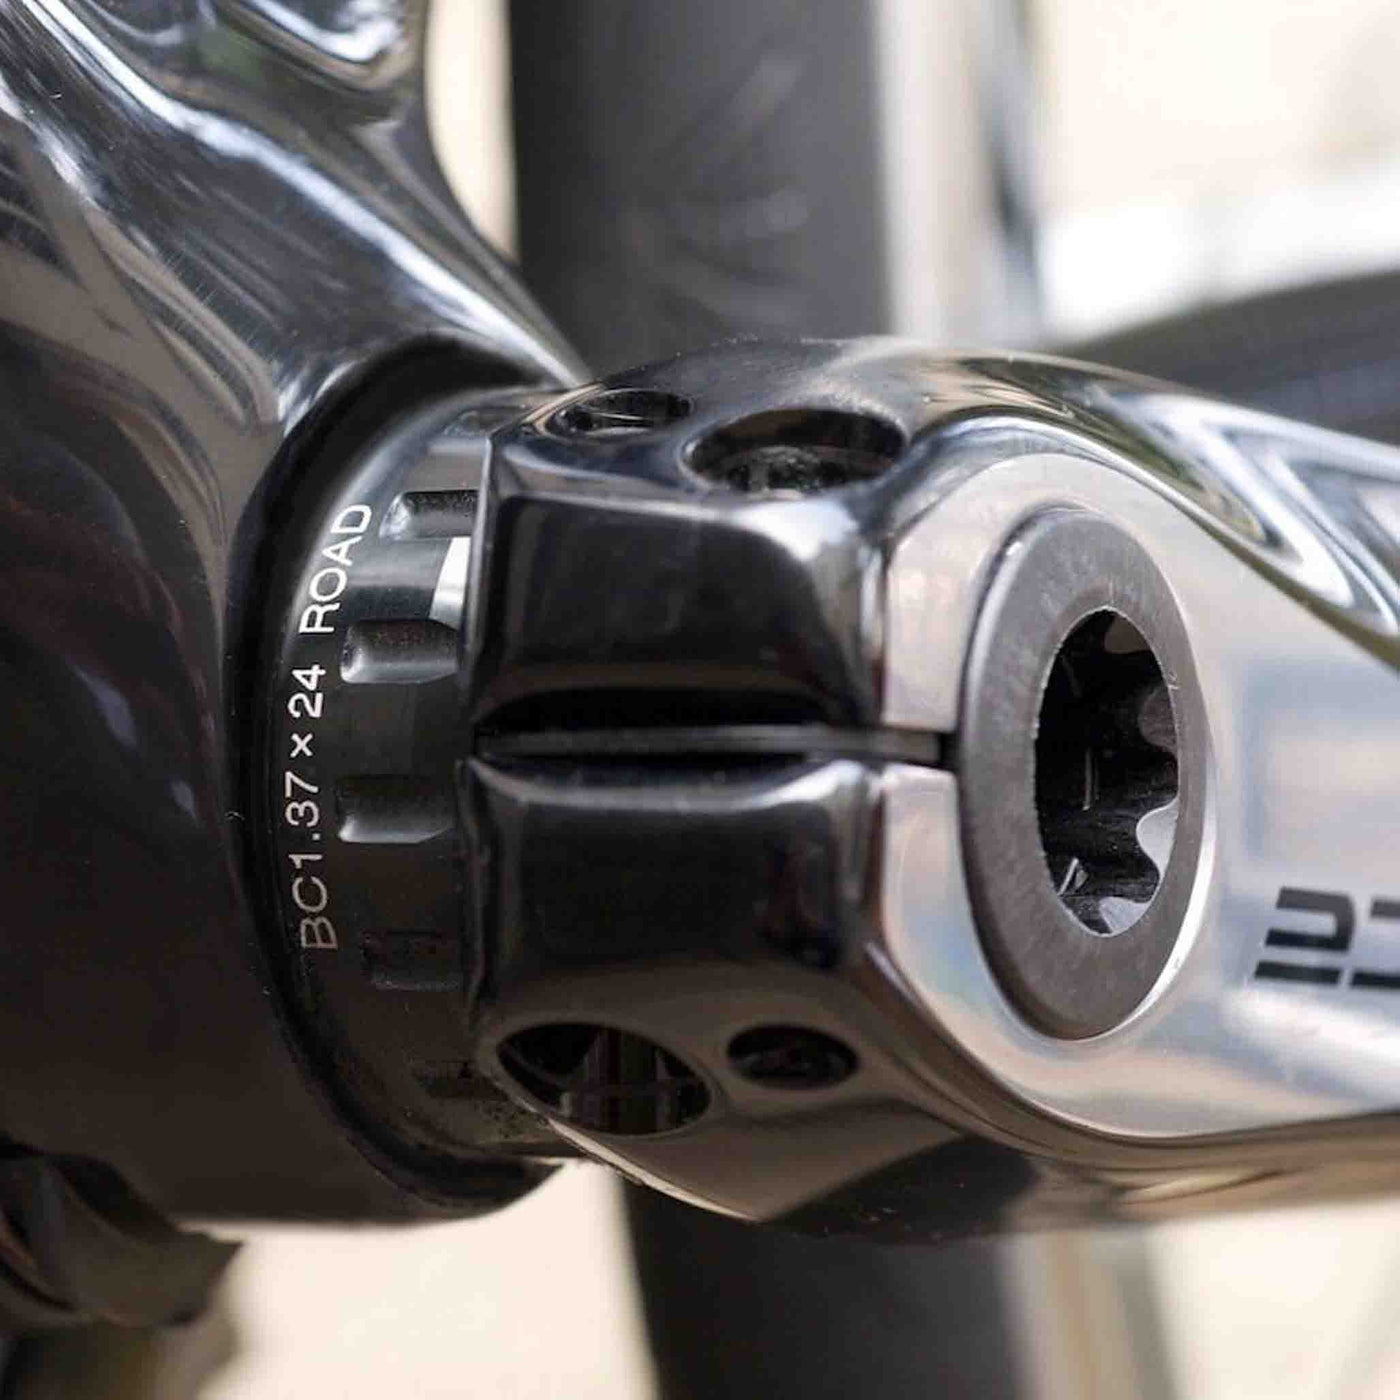 Road Bike Bottom Brackets, BB from Shimano Sram and Campagnolo all standards including GPX, Pressfit, external, BB95, BB90, PF30, OSBB, conventional, threaded and more